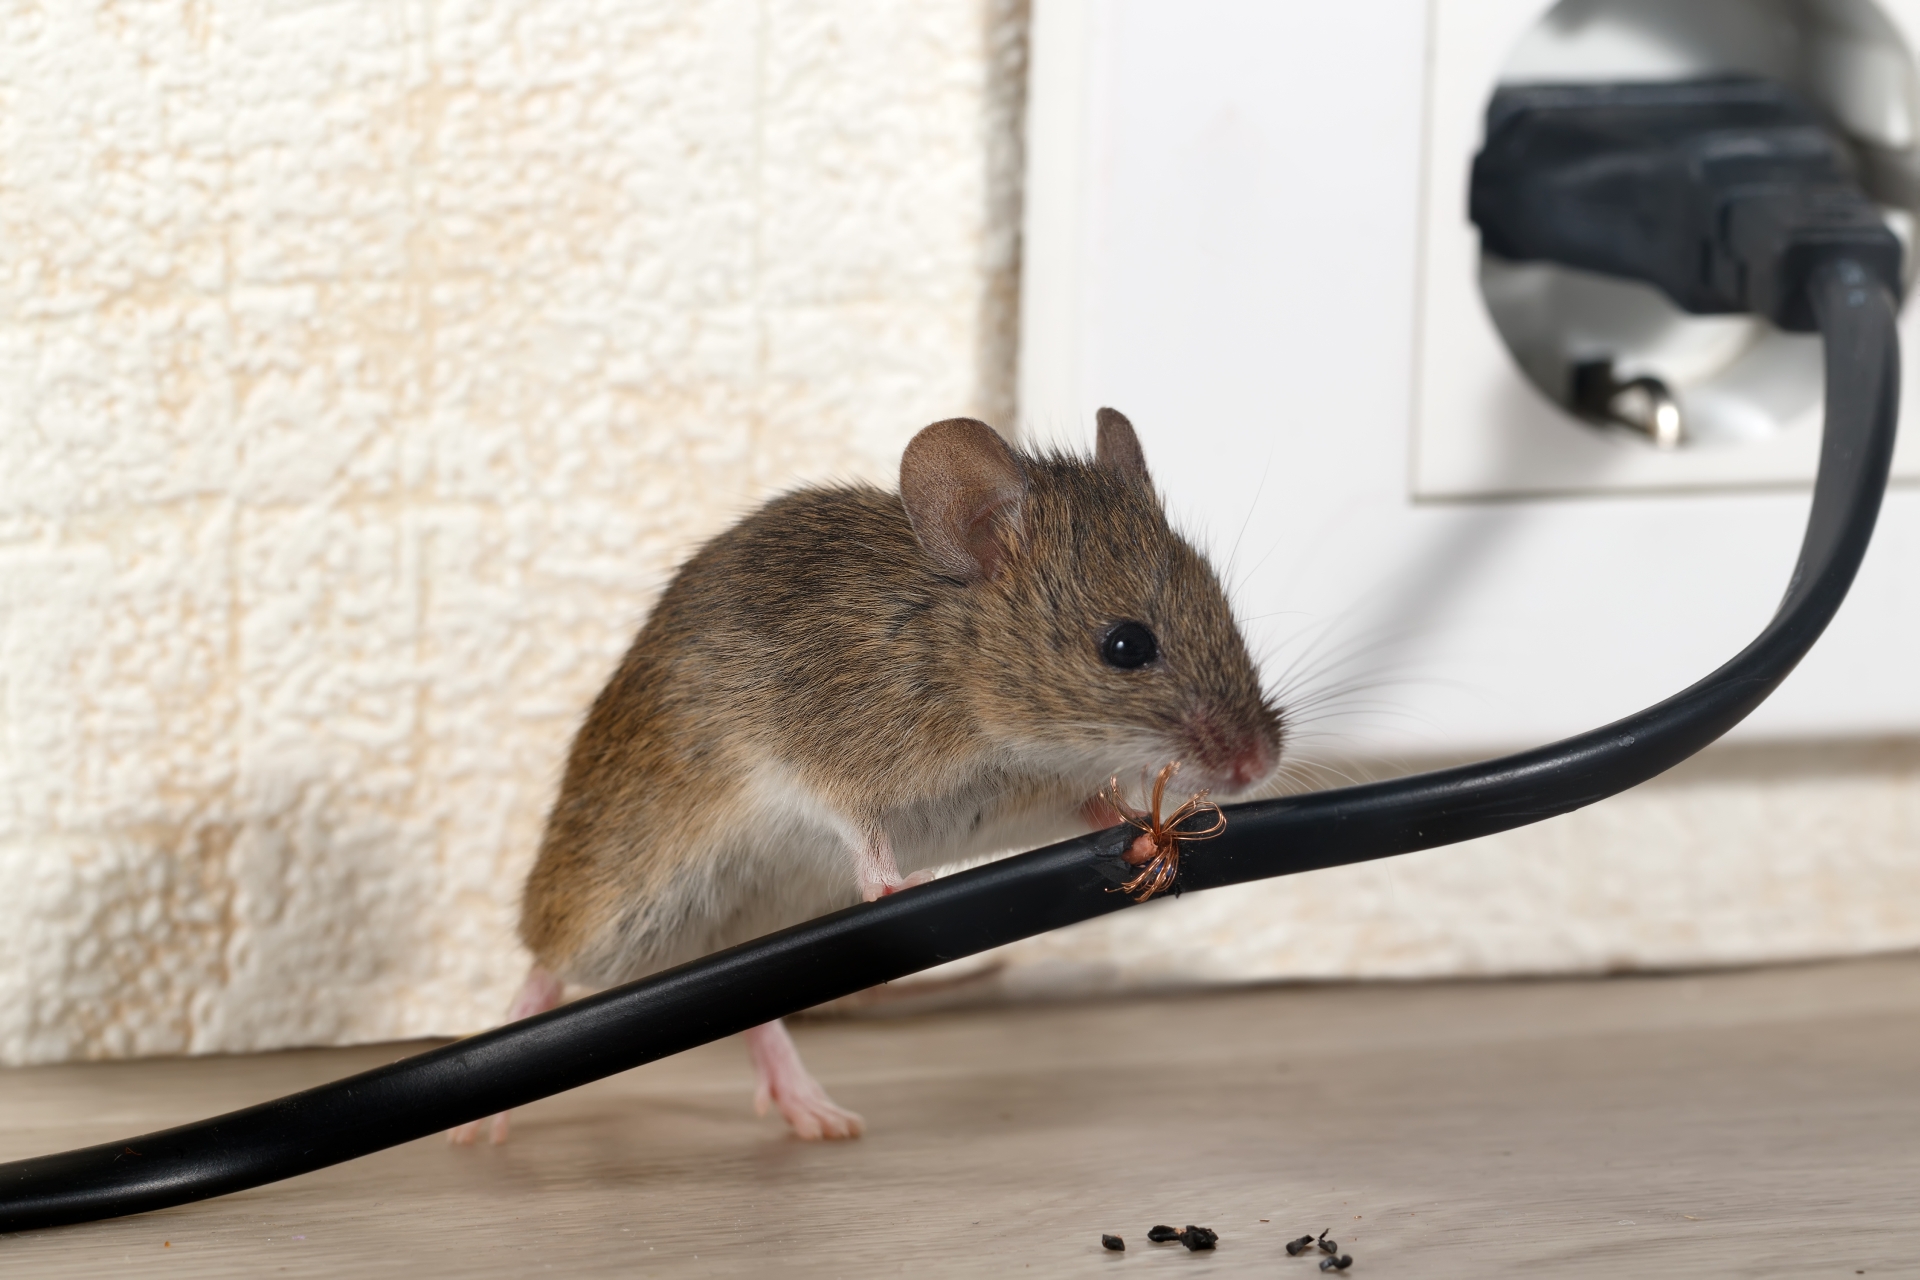 Mice Infestation, Pest Control in Soho, W1. Call Now 020 8166 9746